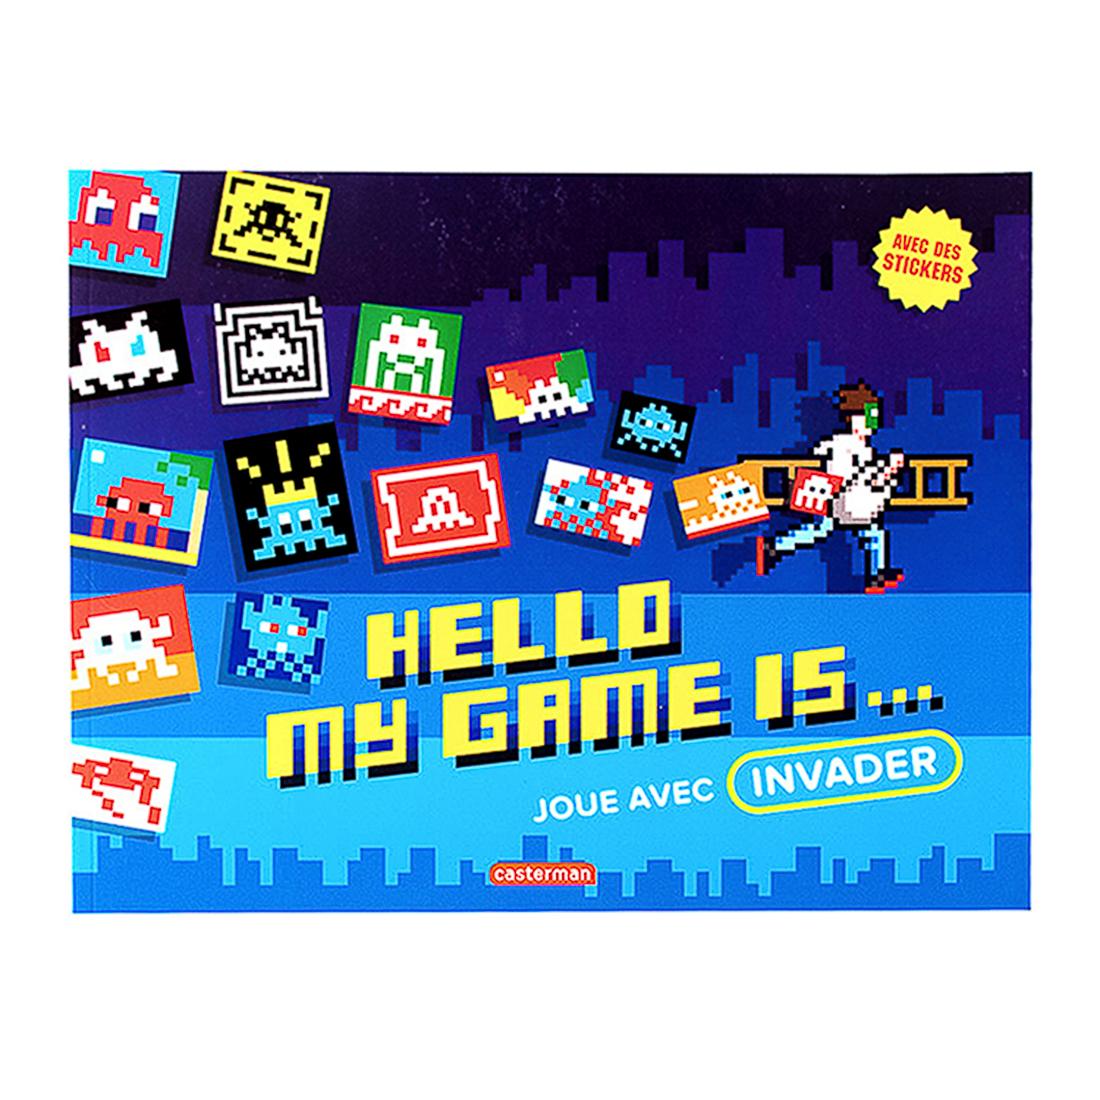 Released in conjunction with  the Hello My Game is exhibition at Musee En Herbe, Paris 2017.
Contains games and puzzles featuring Invader artworks.
40 pages with 4 pages of Invader Stickers.
Paperback.
Only published in French.






RELATED